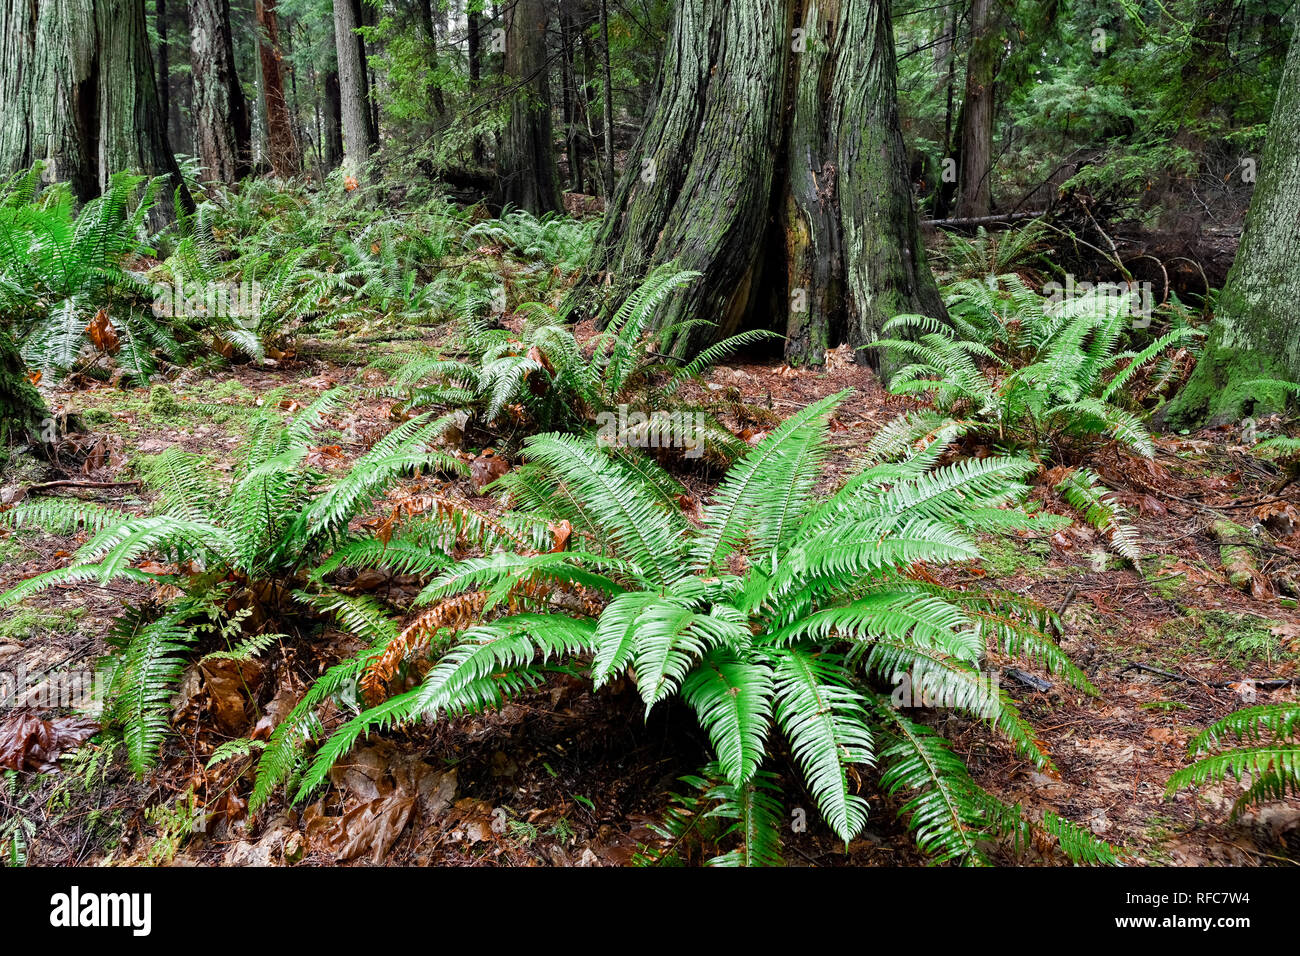 Western spada fern, foresta, Lighthouse Park, West Vancouver, British Columbia, Canada Foto Stock